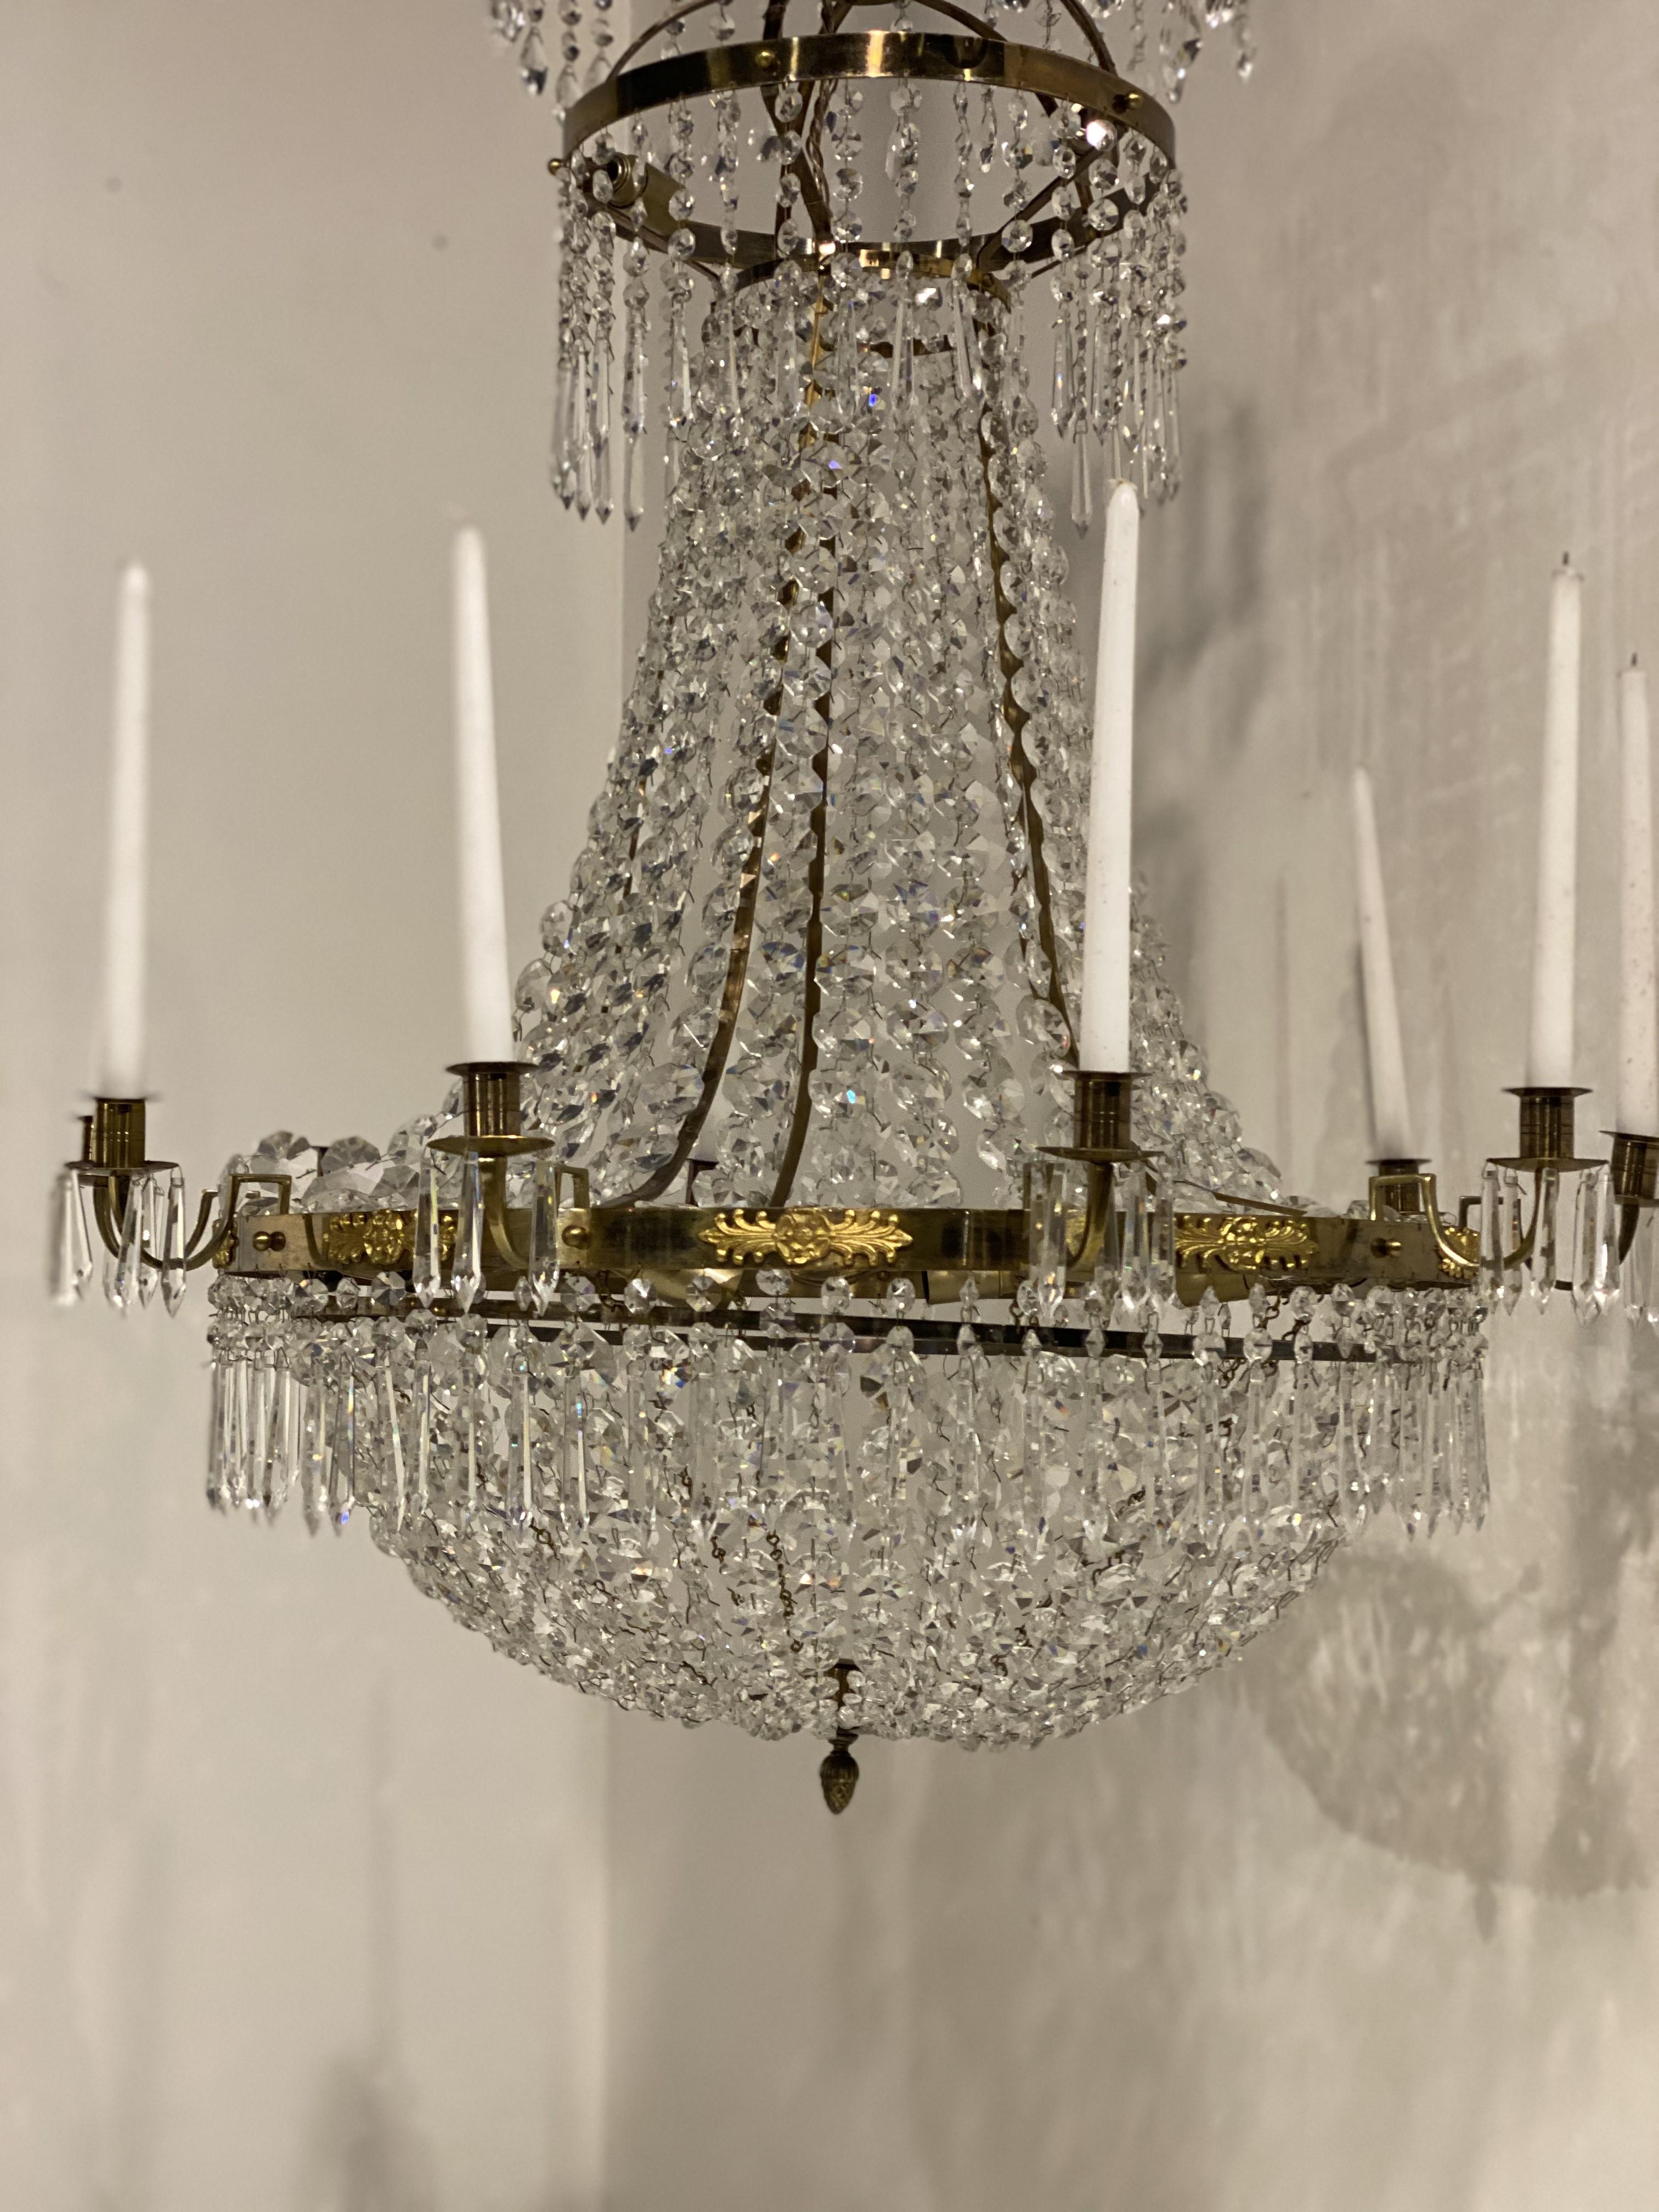 Early 20th Century 1900's Swedish Empire Crystal Chandelier with 12 lights For Sale